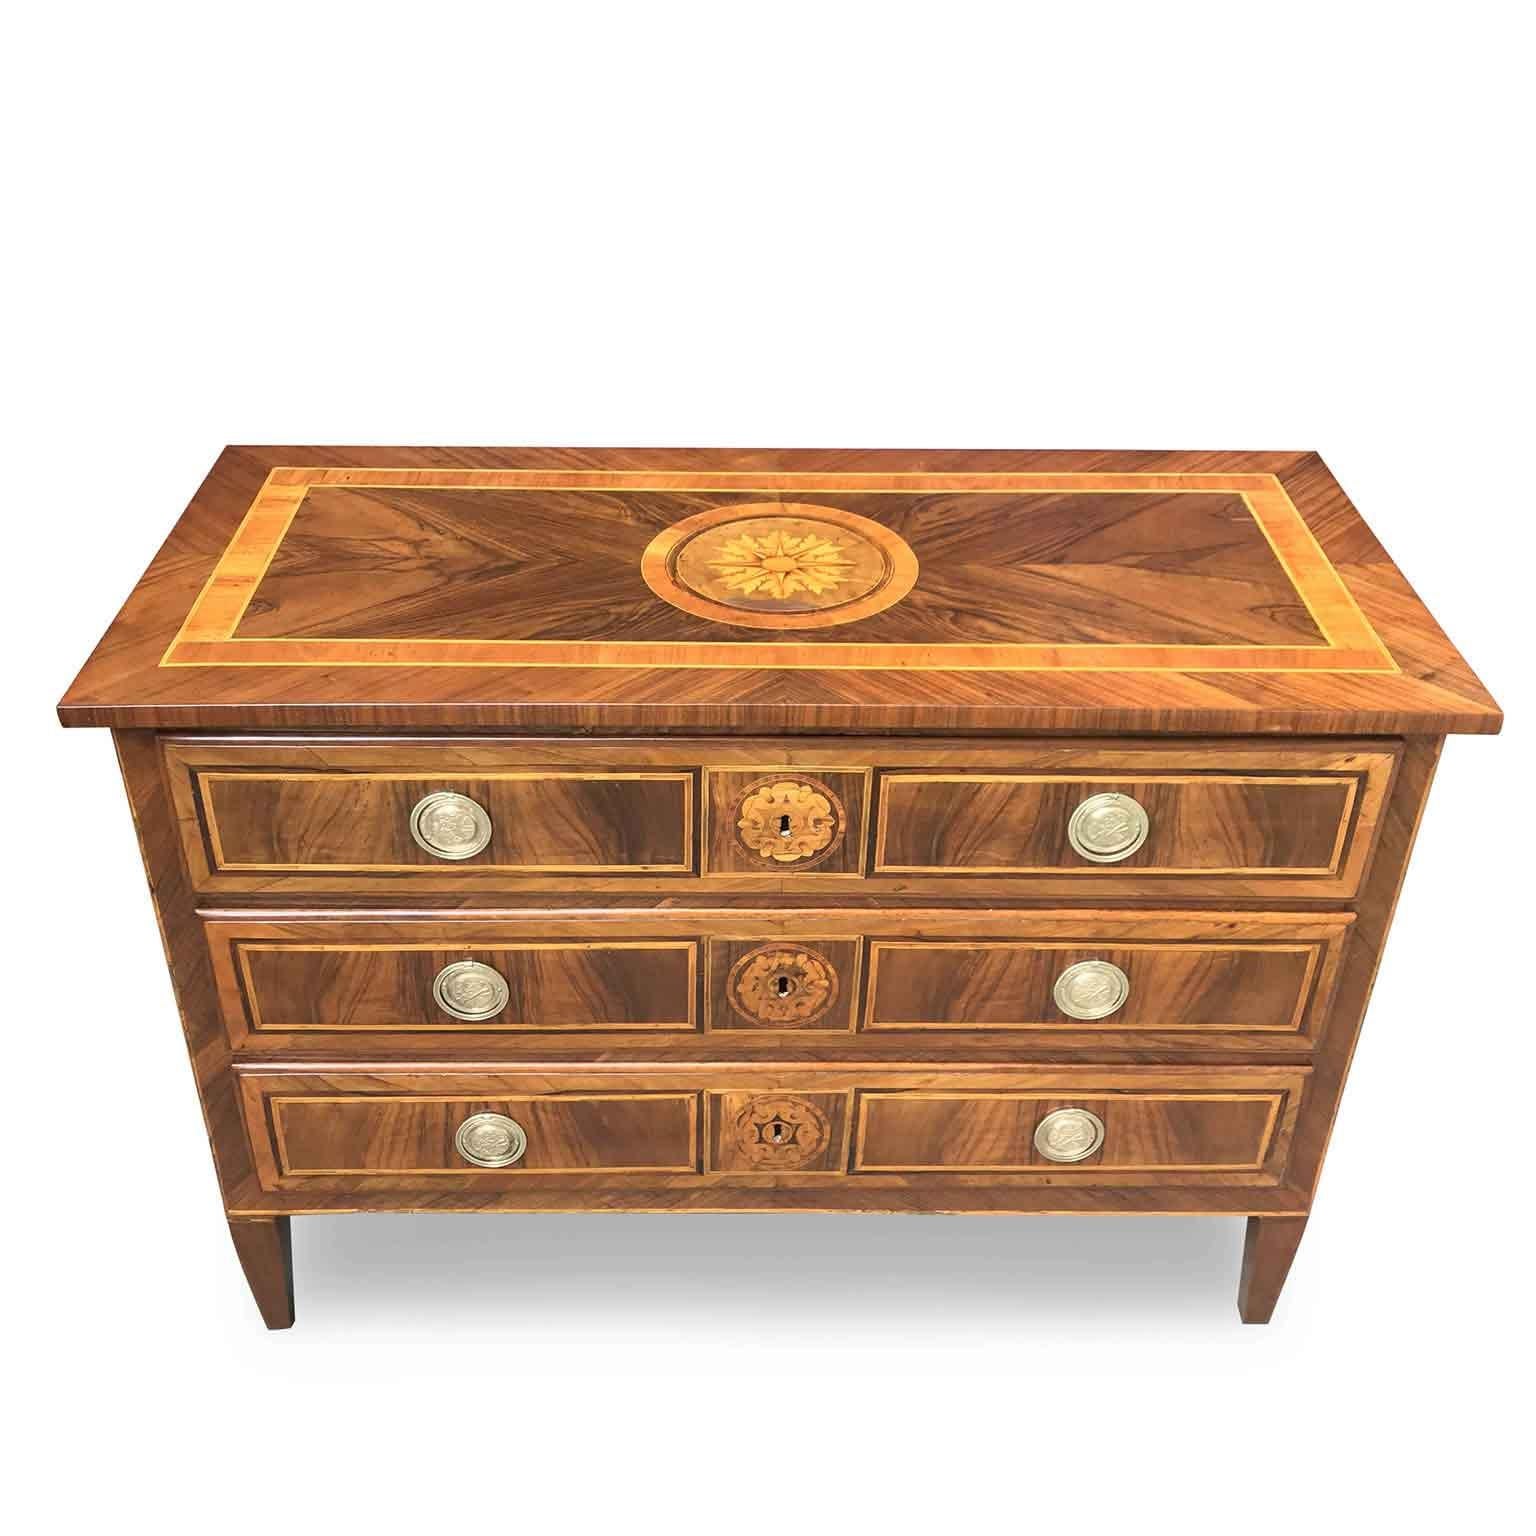 Beautiful rose Marquetry in this Italian Directoire three drawers commode dating back to the early 19th century, in good age related condition.
Top with an inlaid rose window in the middle, walnut veneered and inlaid with three drawers on the front.